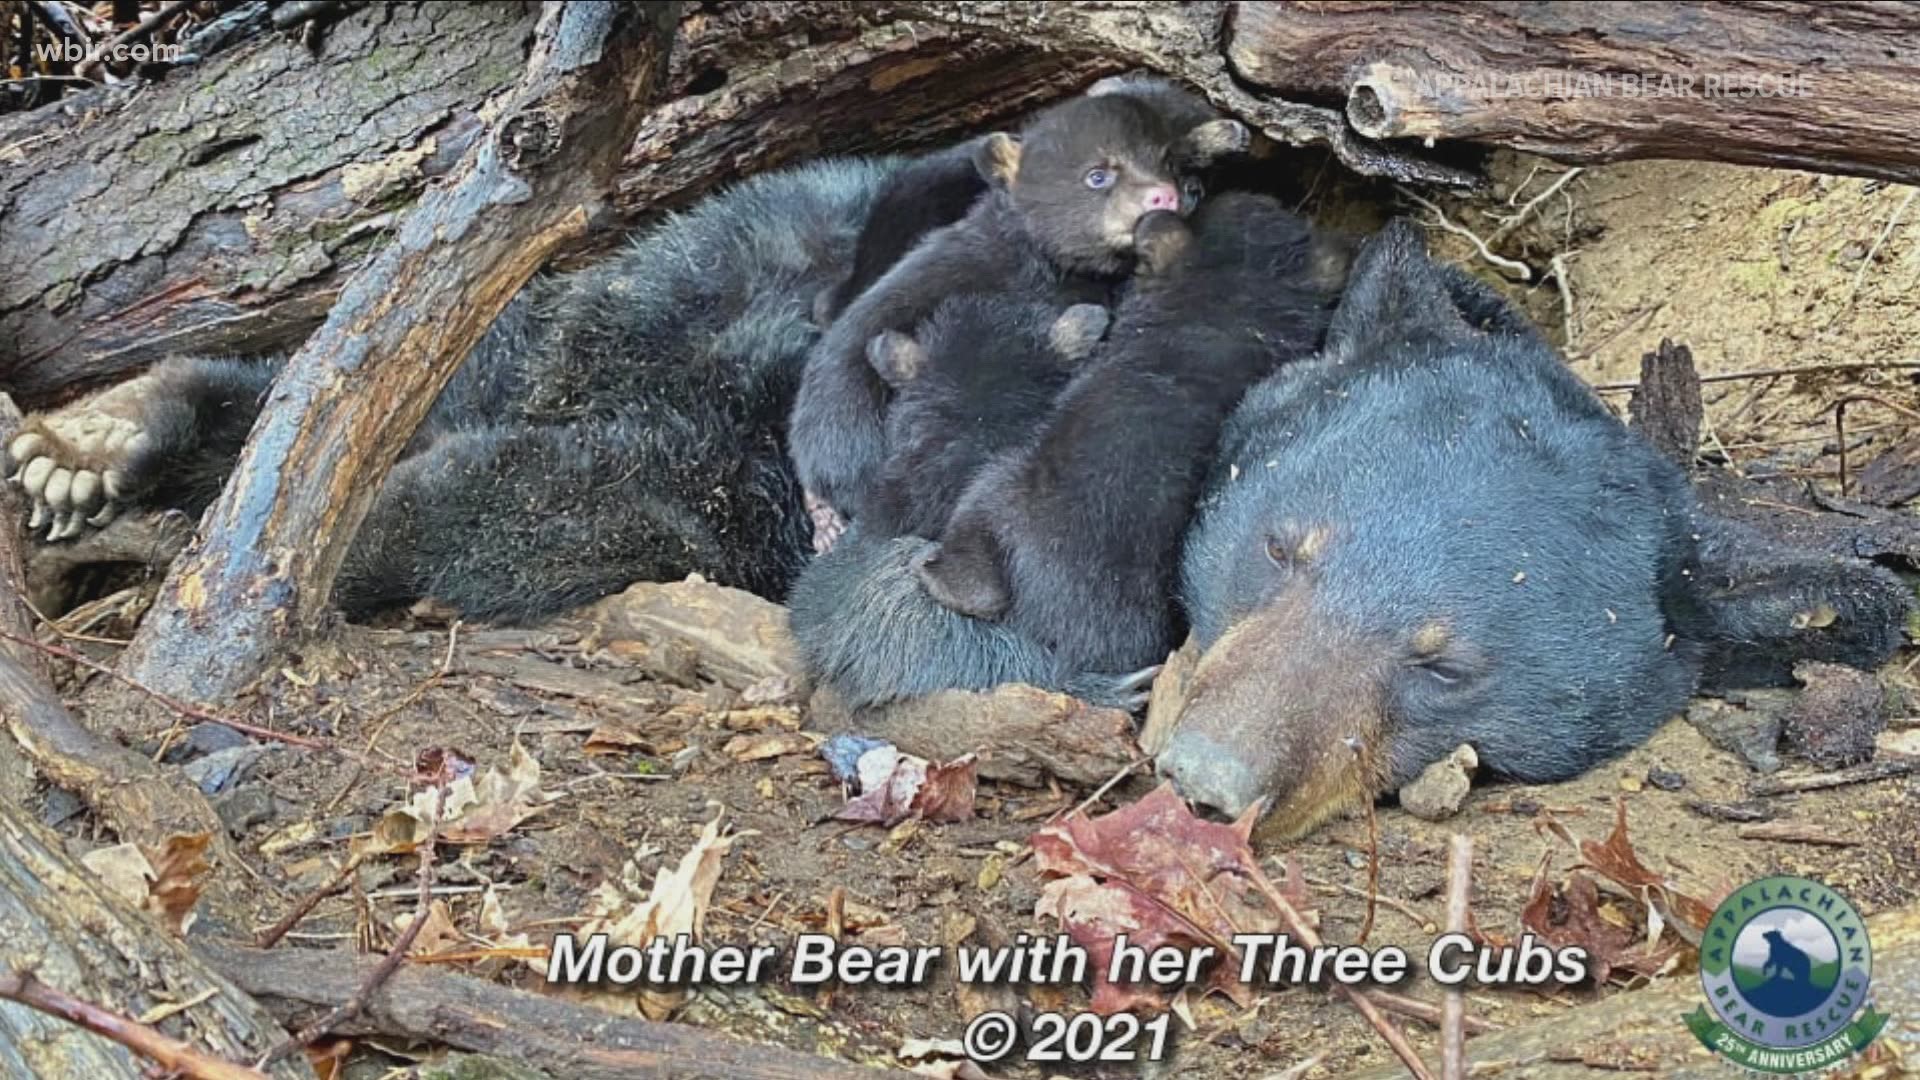 The Appalachian Bear Rescue said that they received more calls, emails and text messages about black bears on the move.